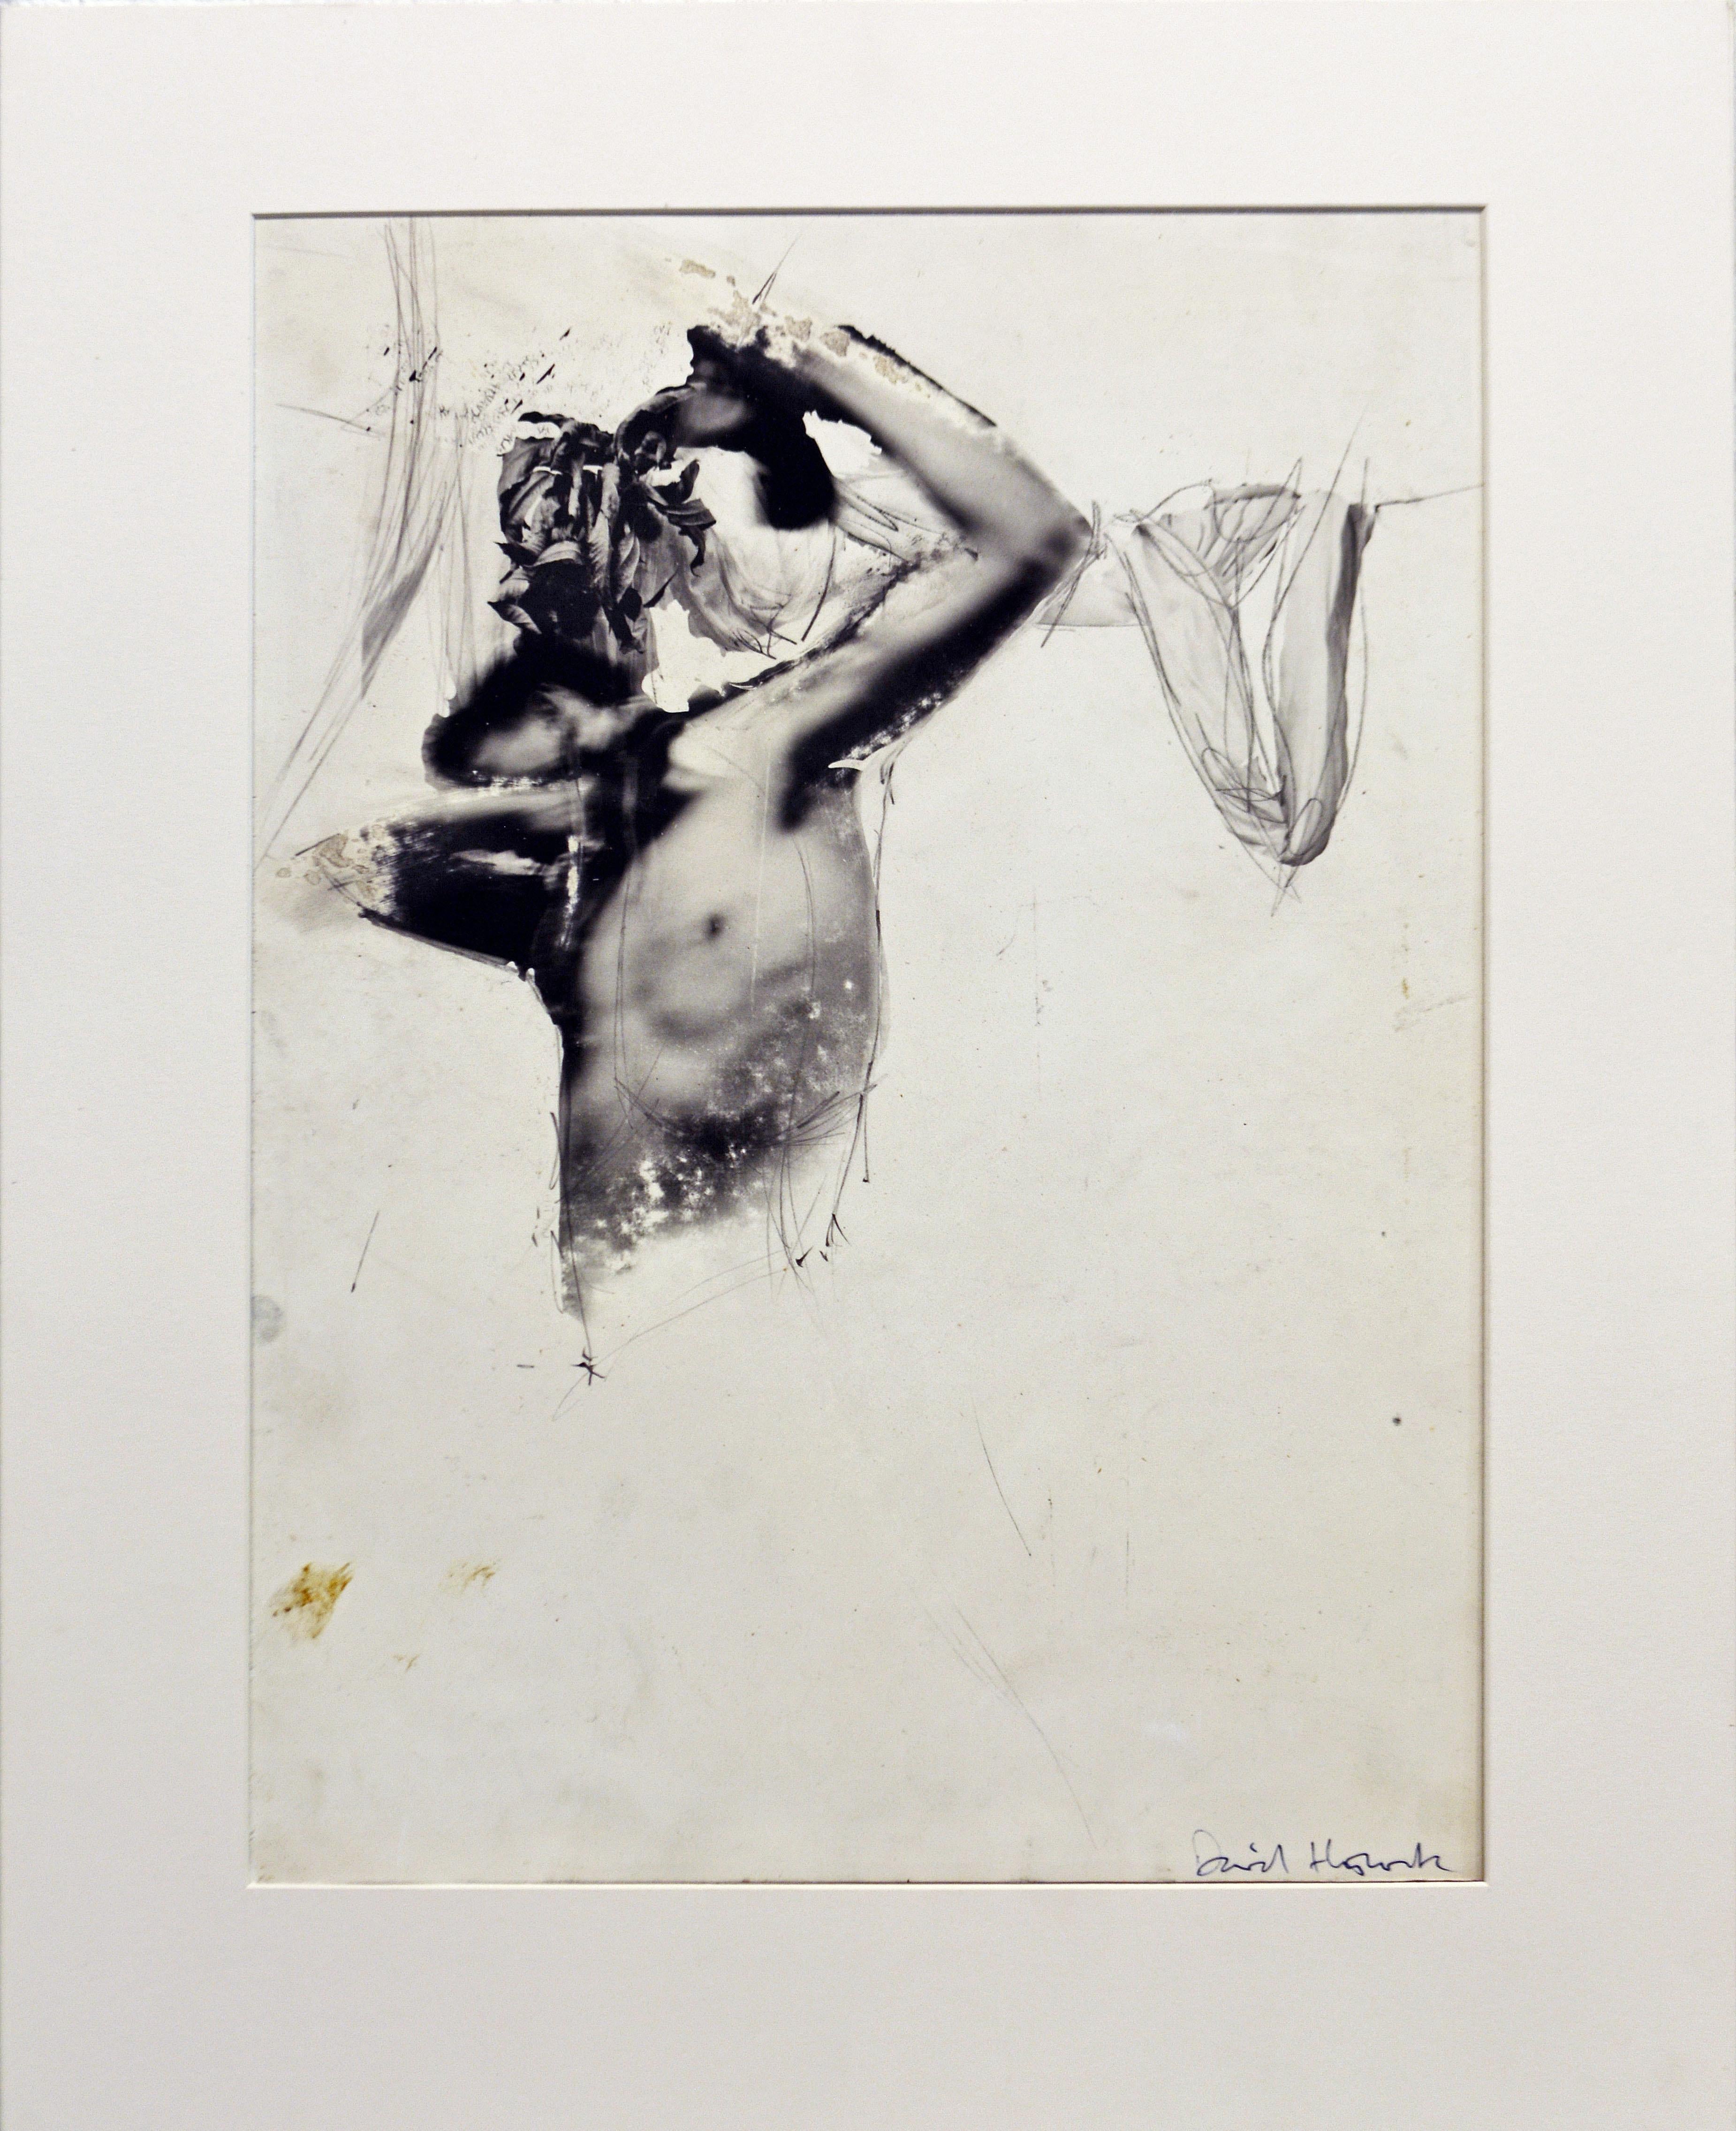 David Hiscock (British b. 1956)
'Photographic Male Nude Composition' 
Photographic and mixed media print with applied handwork.
Mounted on gray cardboard and matted. Signed recto and inscribed verso on cardboard.
Image: 11.25 x 15.5 in / 28.5 x